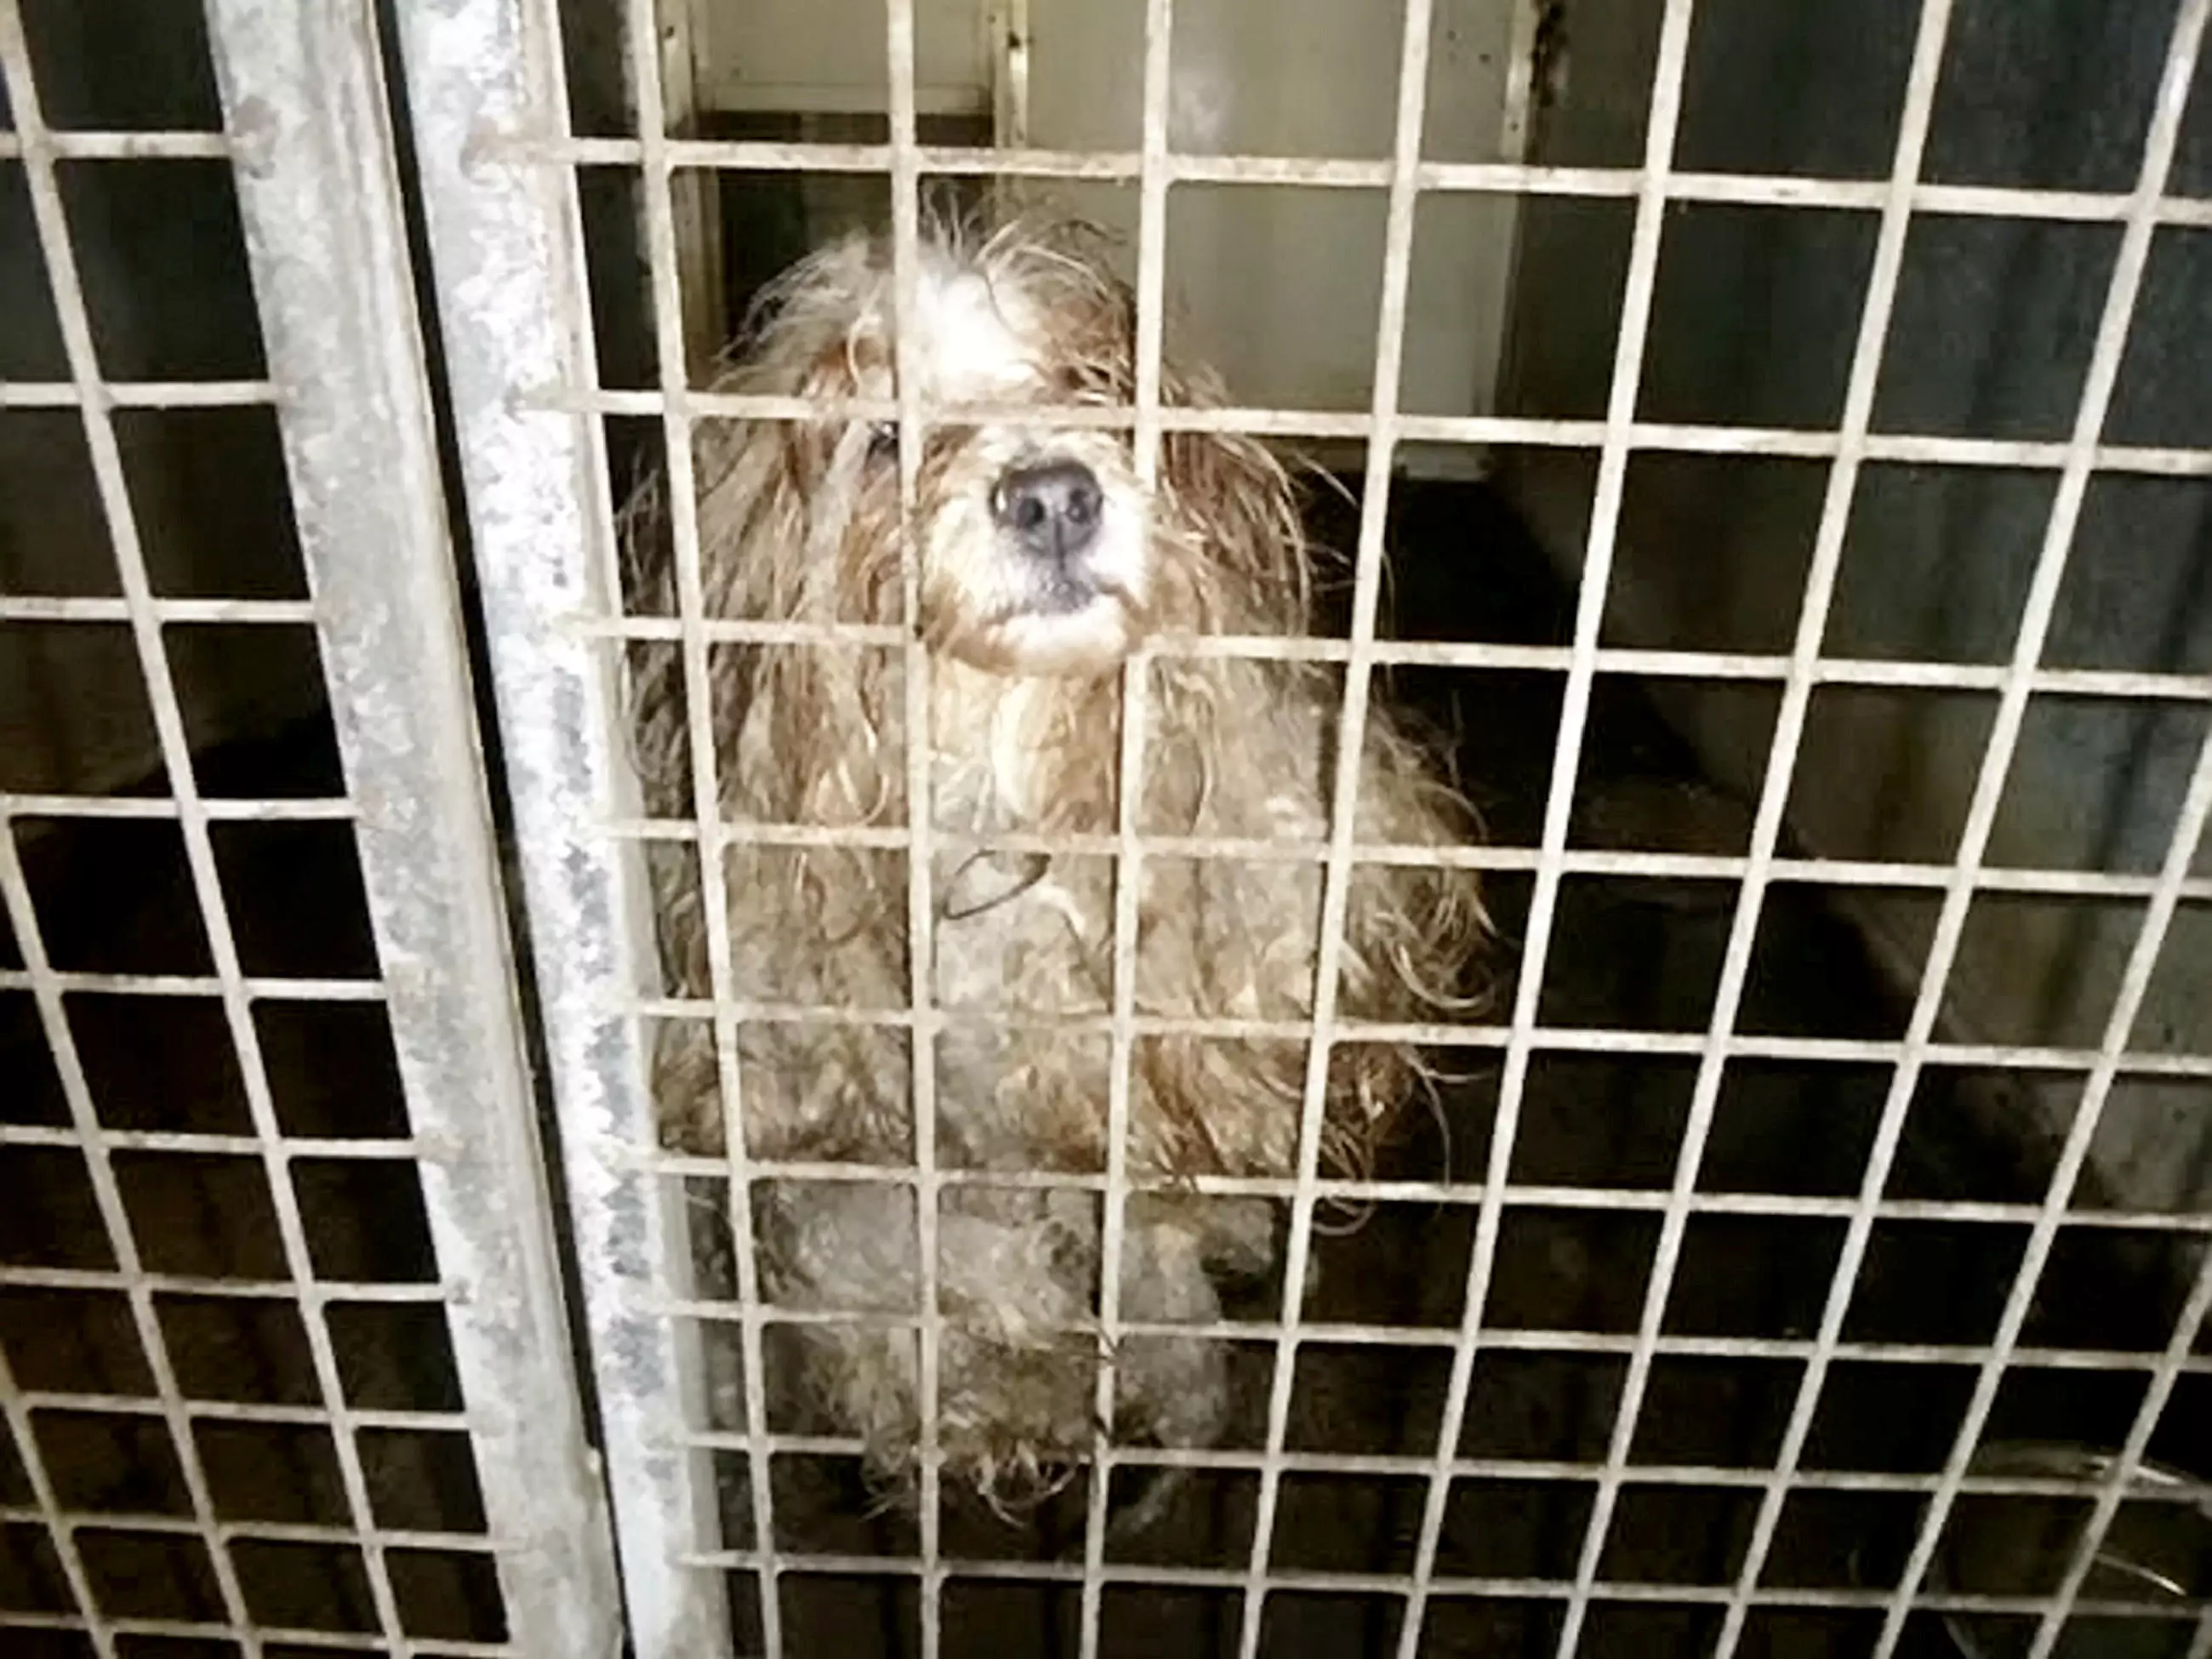 The dogs had been neglected in the kennels (